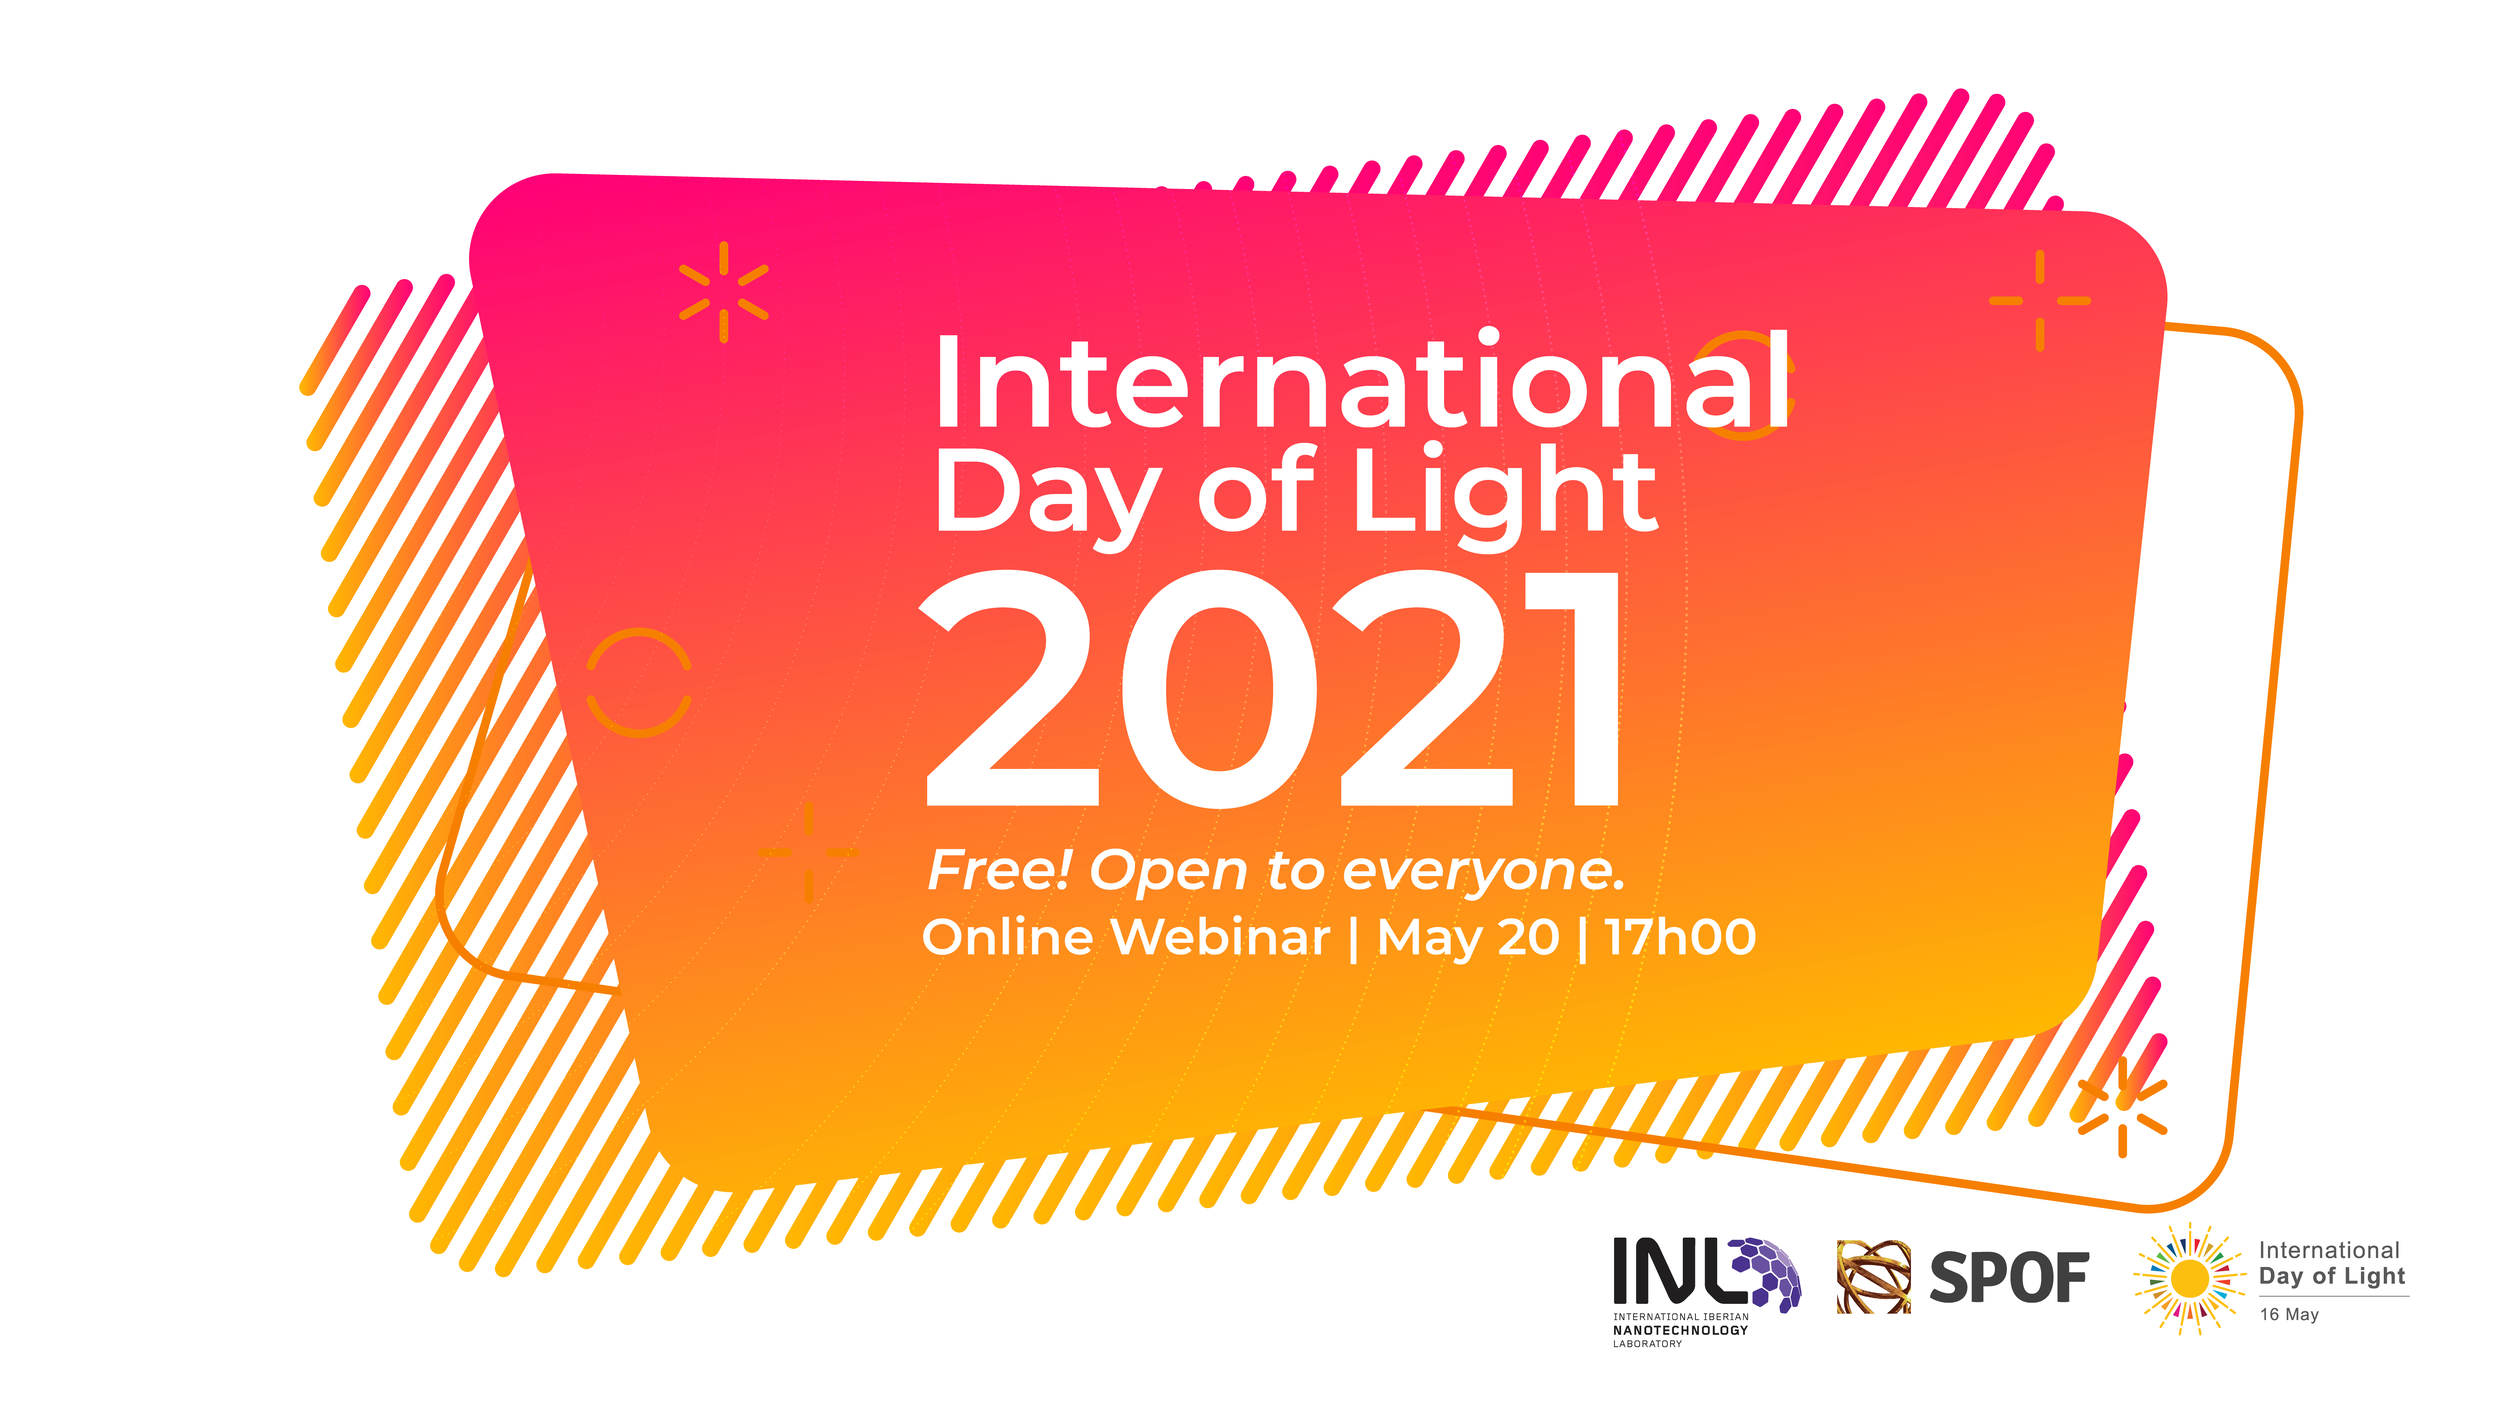 Celebrating the International Day of Light 2021 at INL